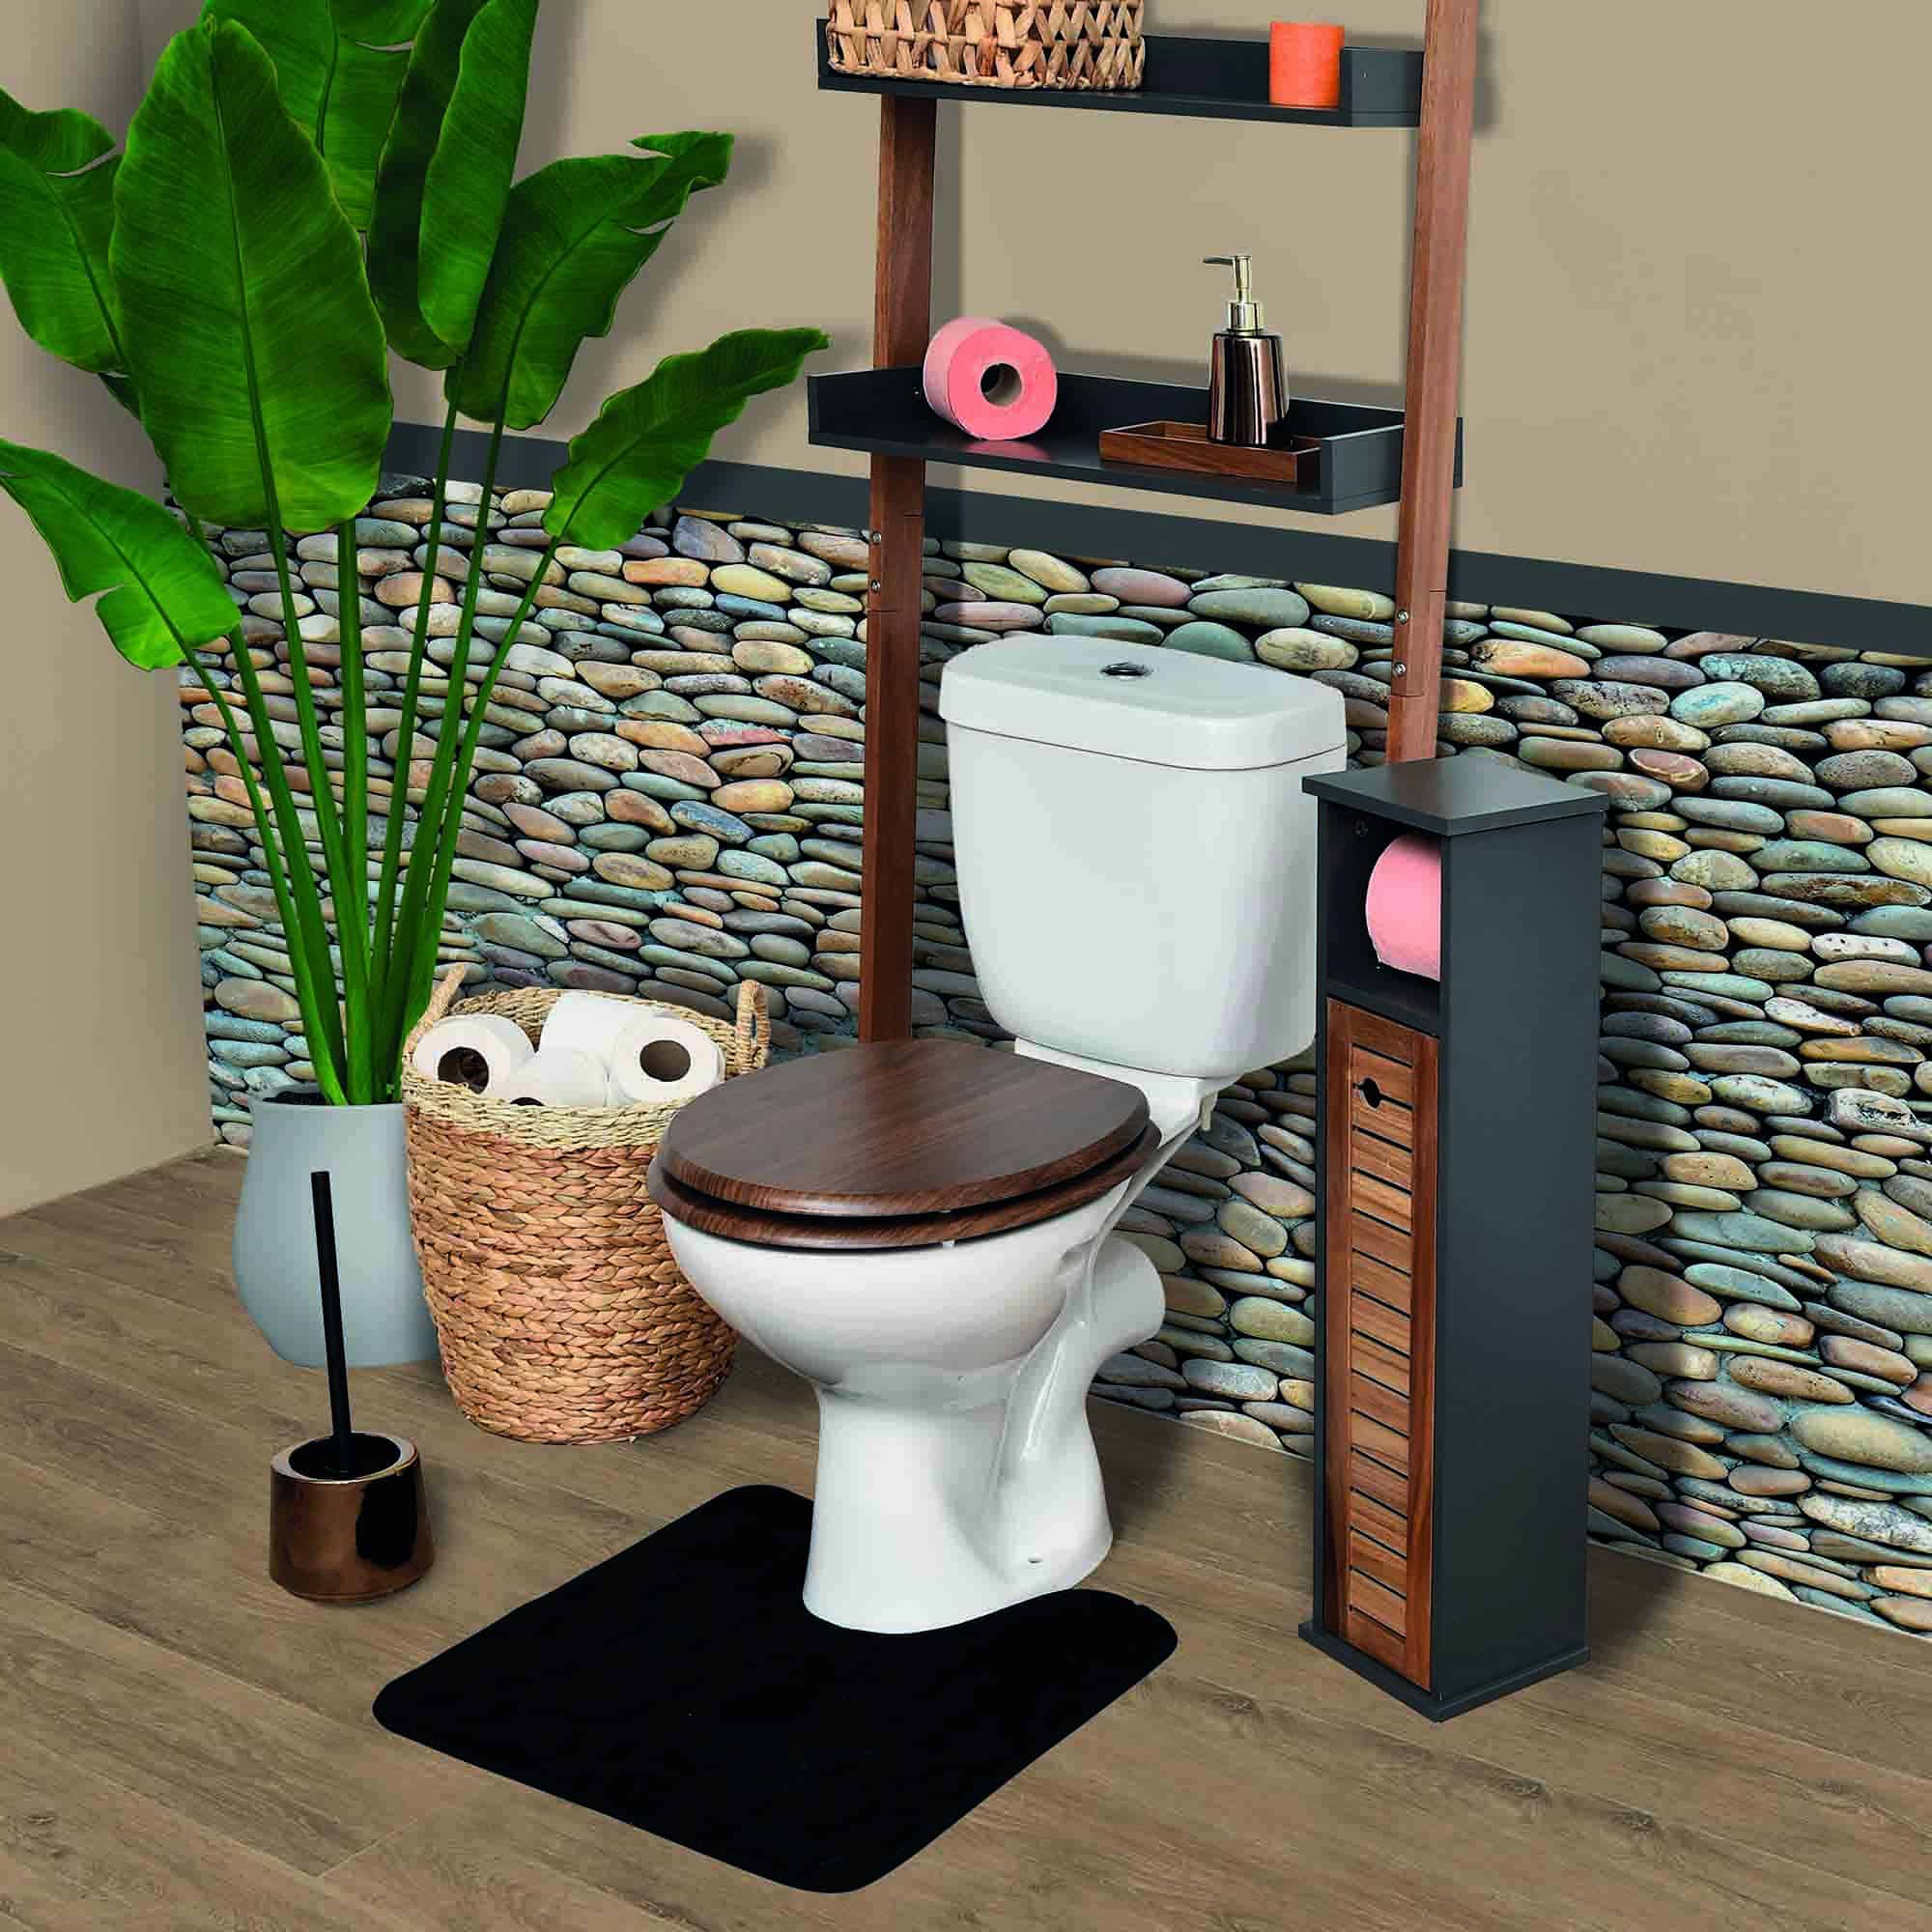 Evideco Toilet Paper Holder Stand Cabinet Elements Acacia - Gray Wood